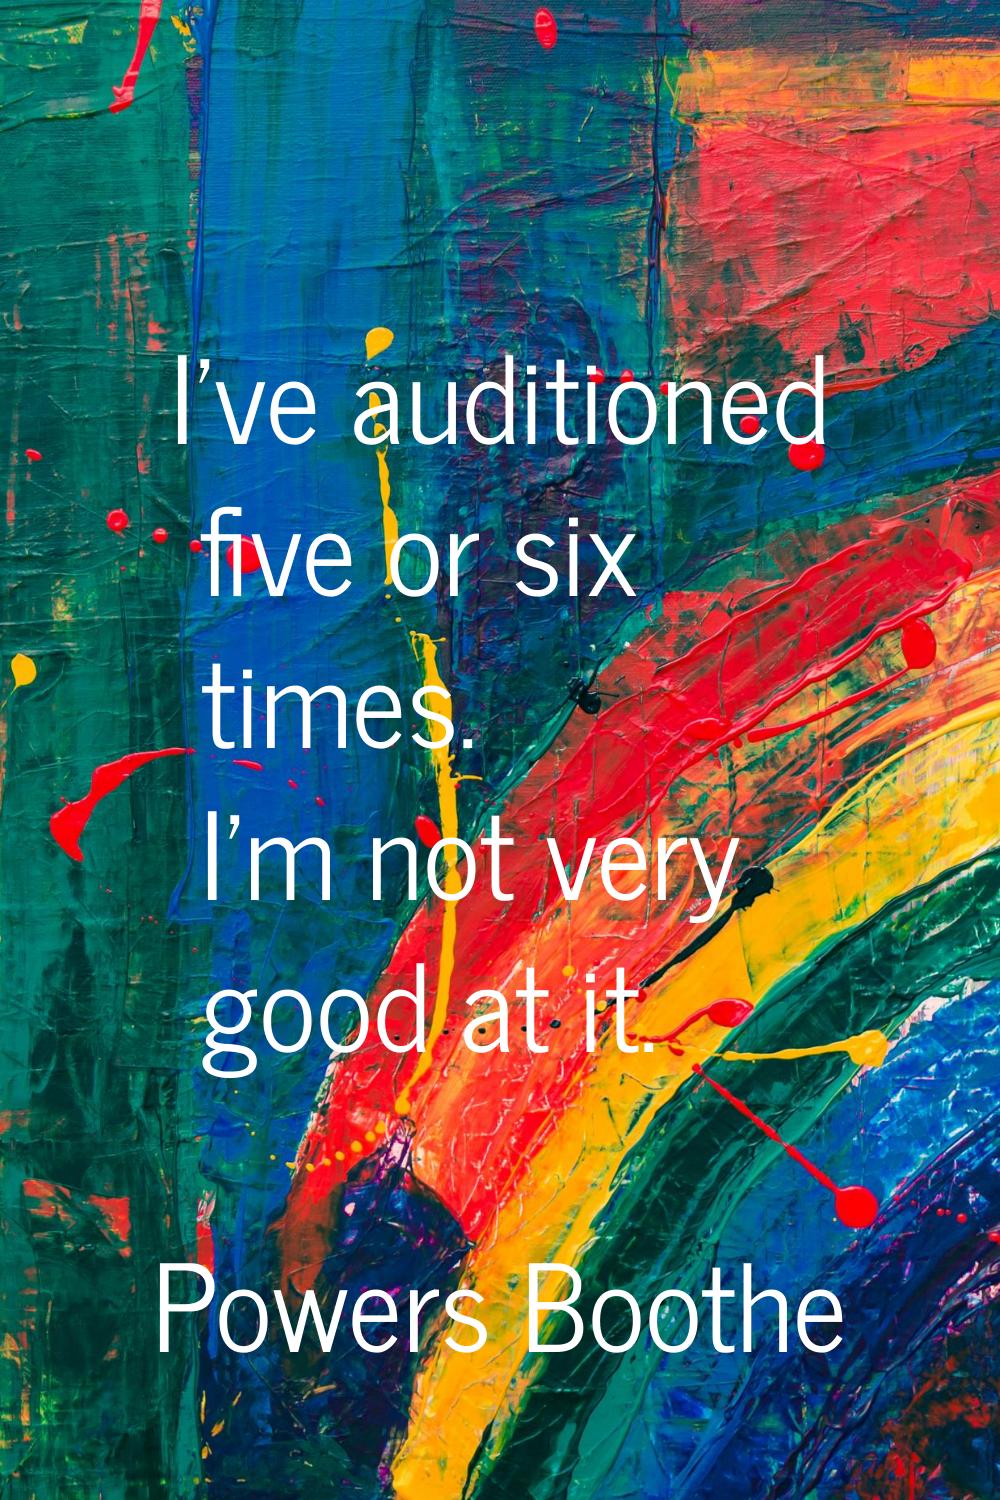 I've auditioned five or six times. I'm not very good at it.